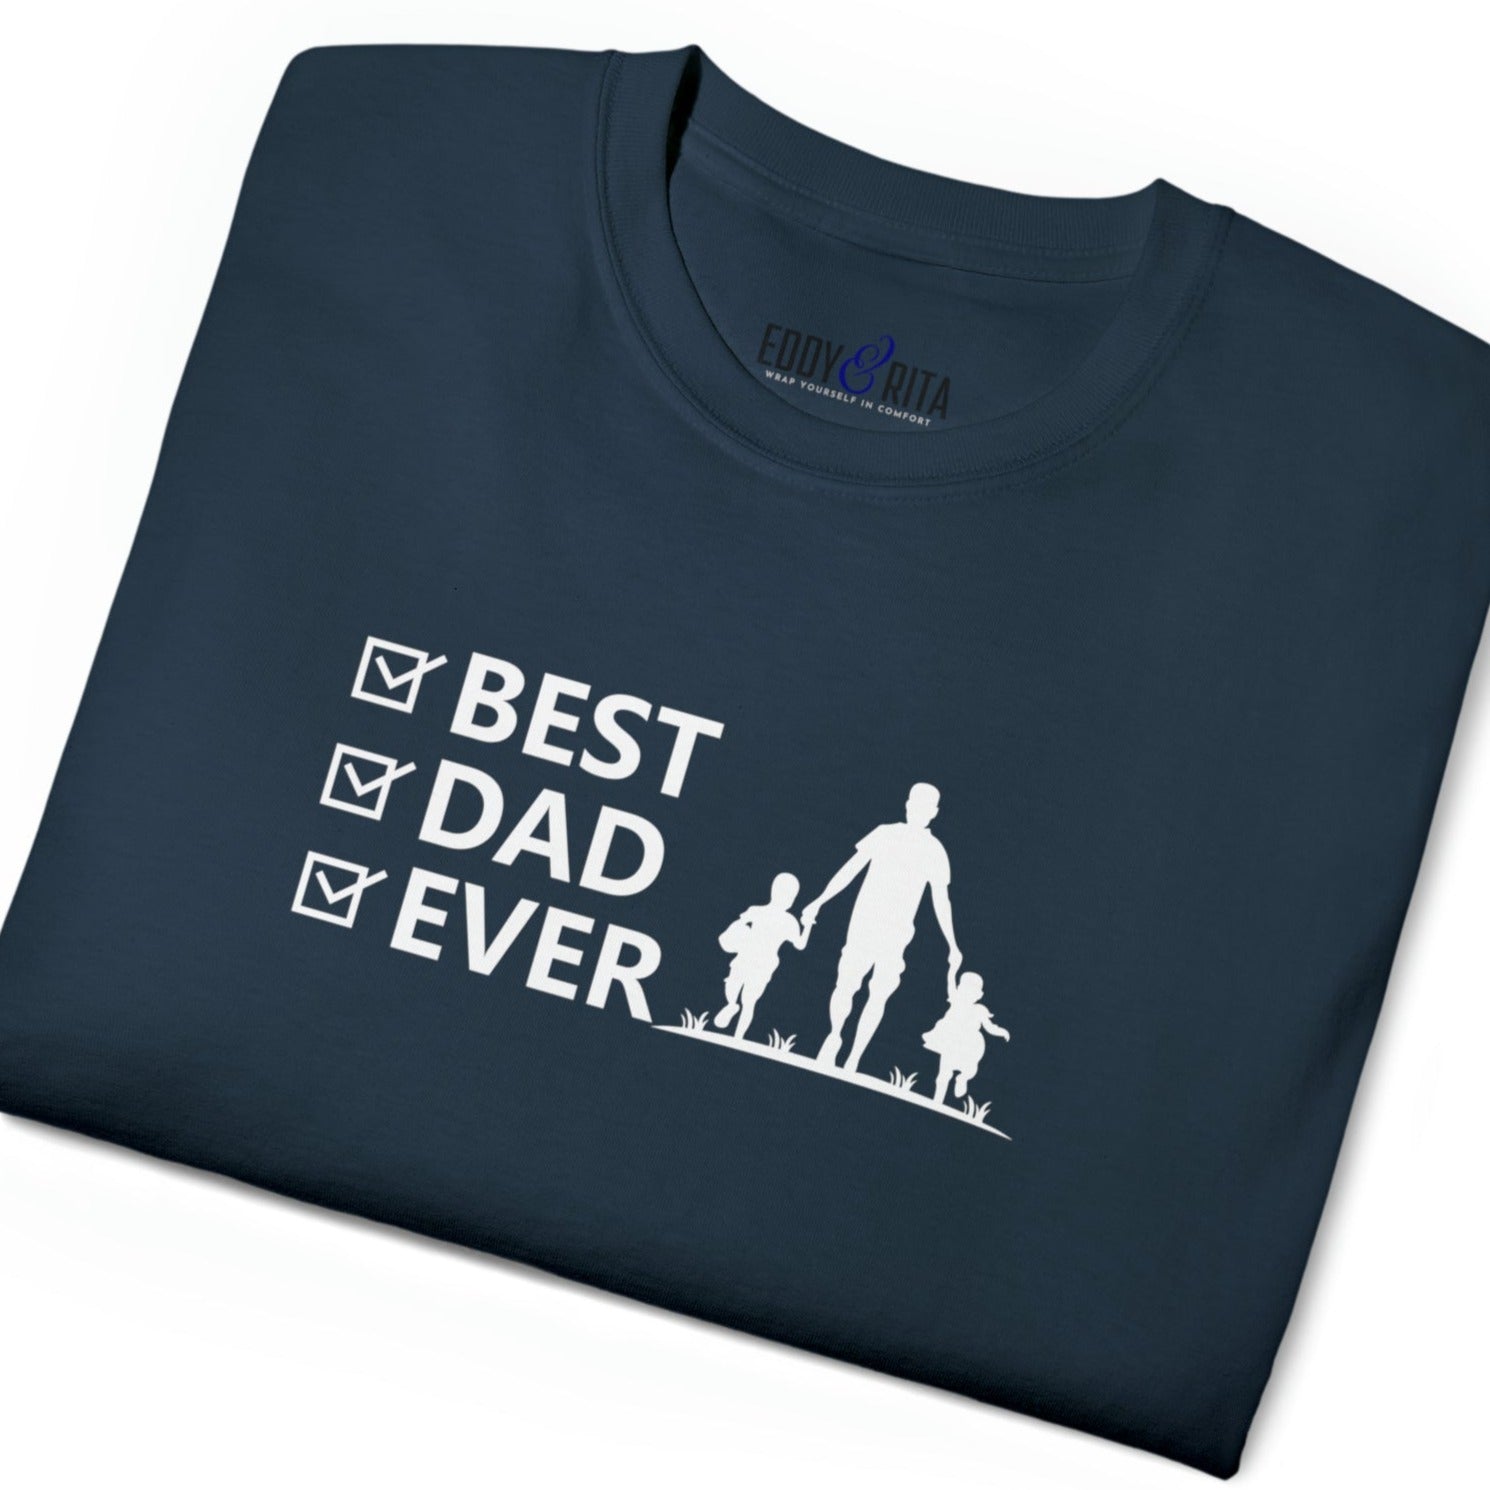 Best Dad Ever Father and Children Men's Tee - Stylish and Heartfelt Shirt - Eddy and Rita